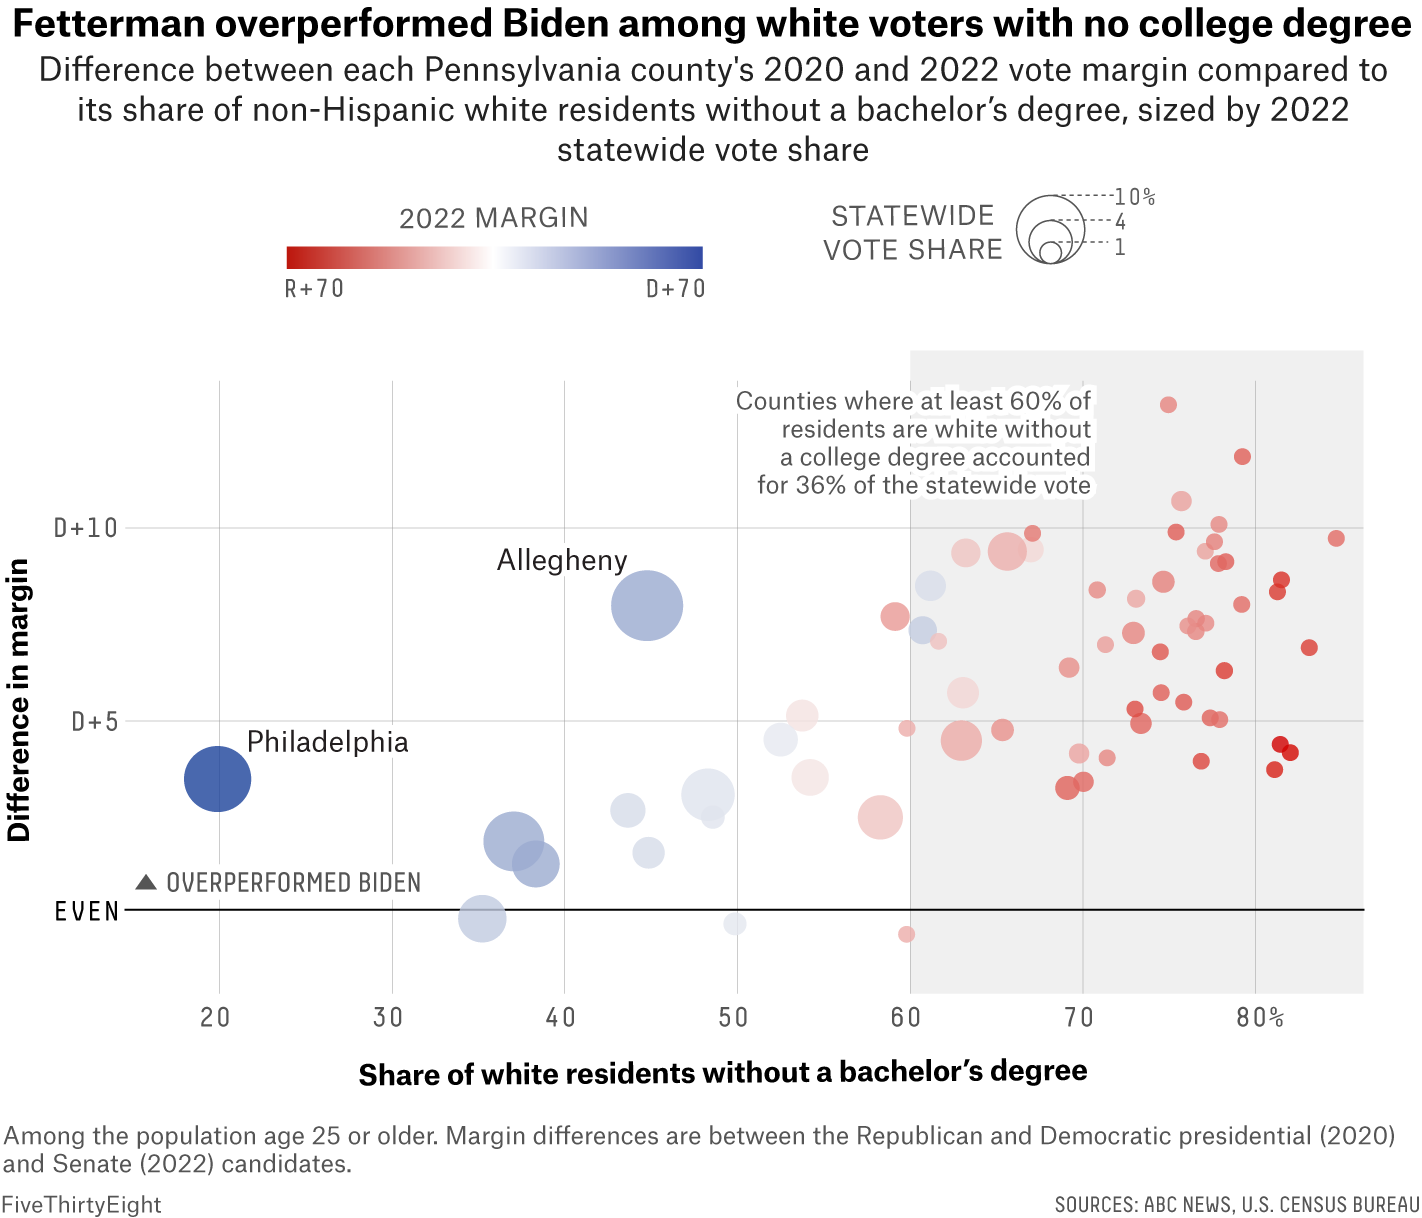 Scatterplot showing the difference between each Pennsylvania county's 2020 presidential election and 2022 Senate race vote margin compared to its share of non-Hispanic white residents without a bachelor’s degree, sized by. 2022 statewide vote share. On the right are a series of small red bubbles, indicating a higher share of white residents without a college degree, that are above the x-axis as Senate candidate John Fetterman ran ahead of Joe Biden in all but one of them.